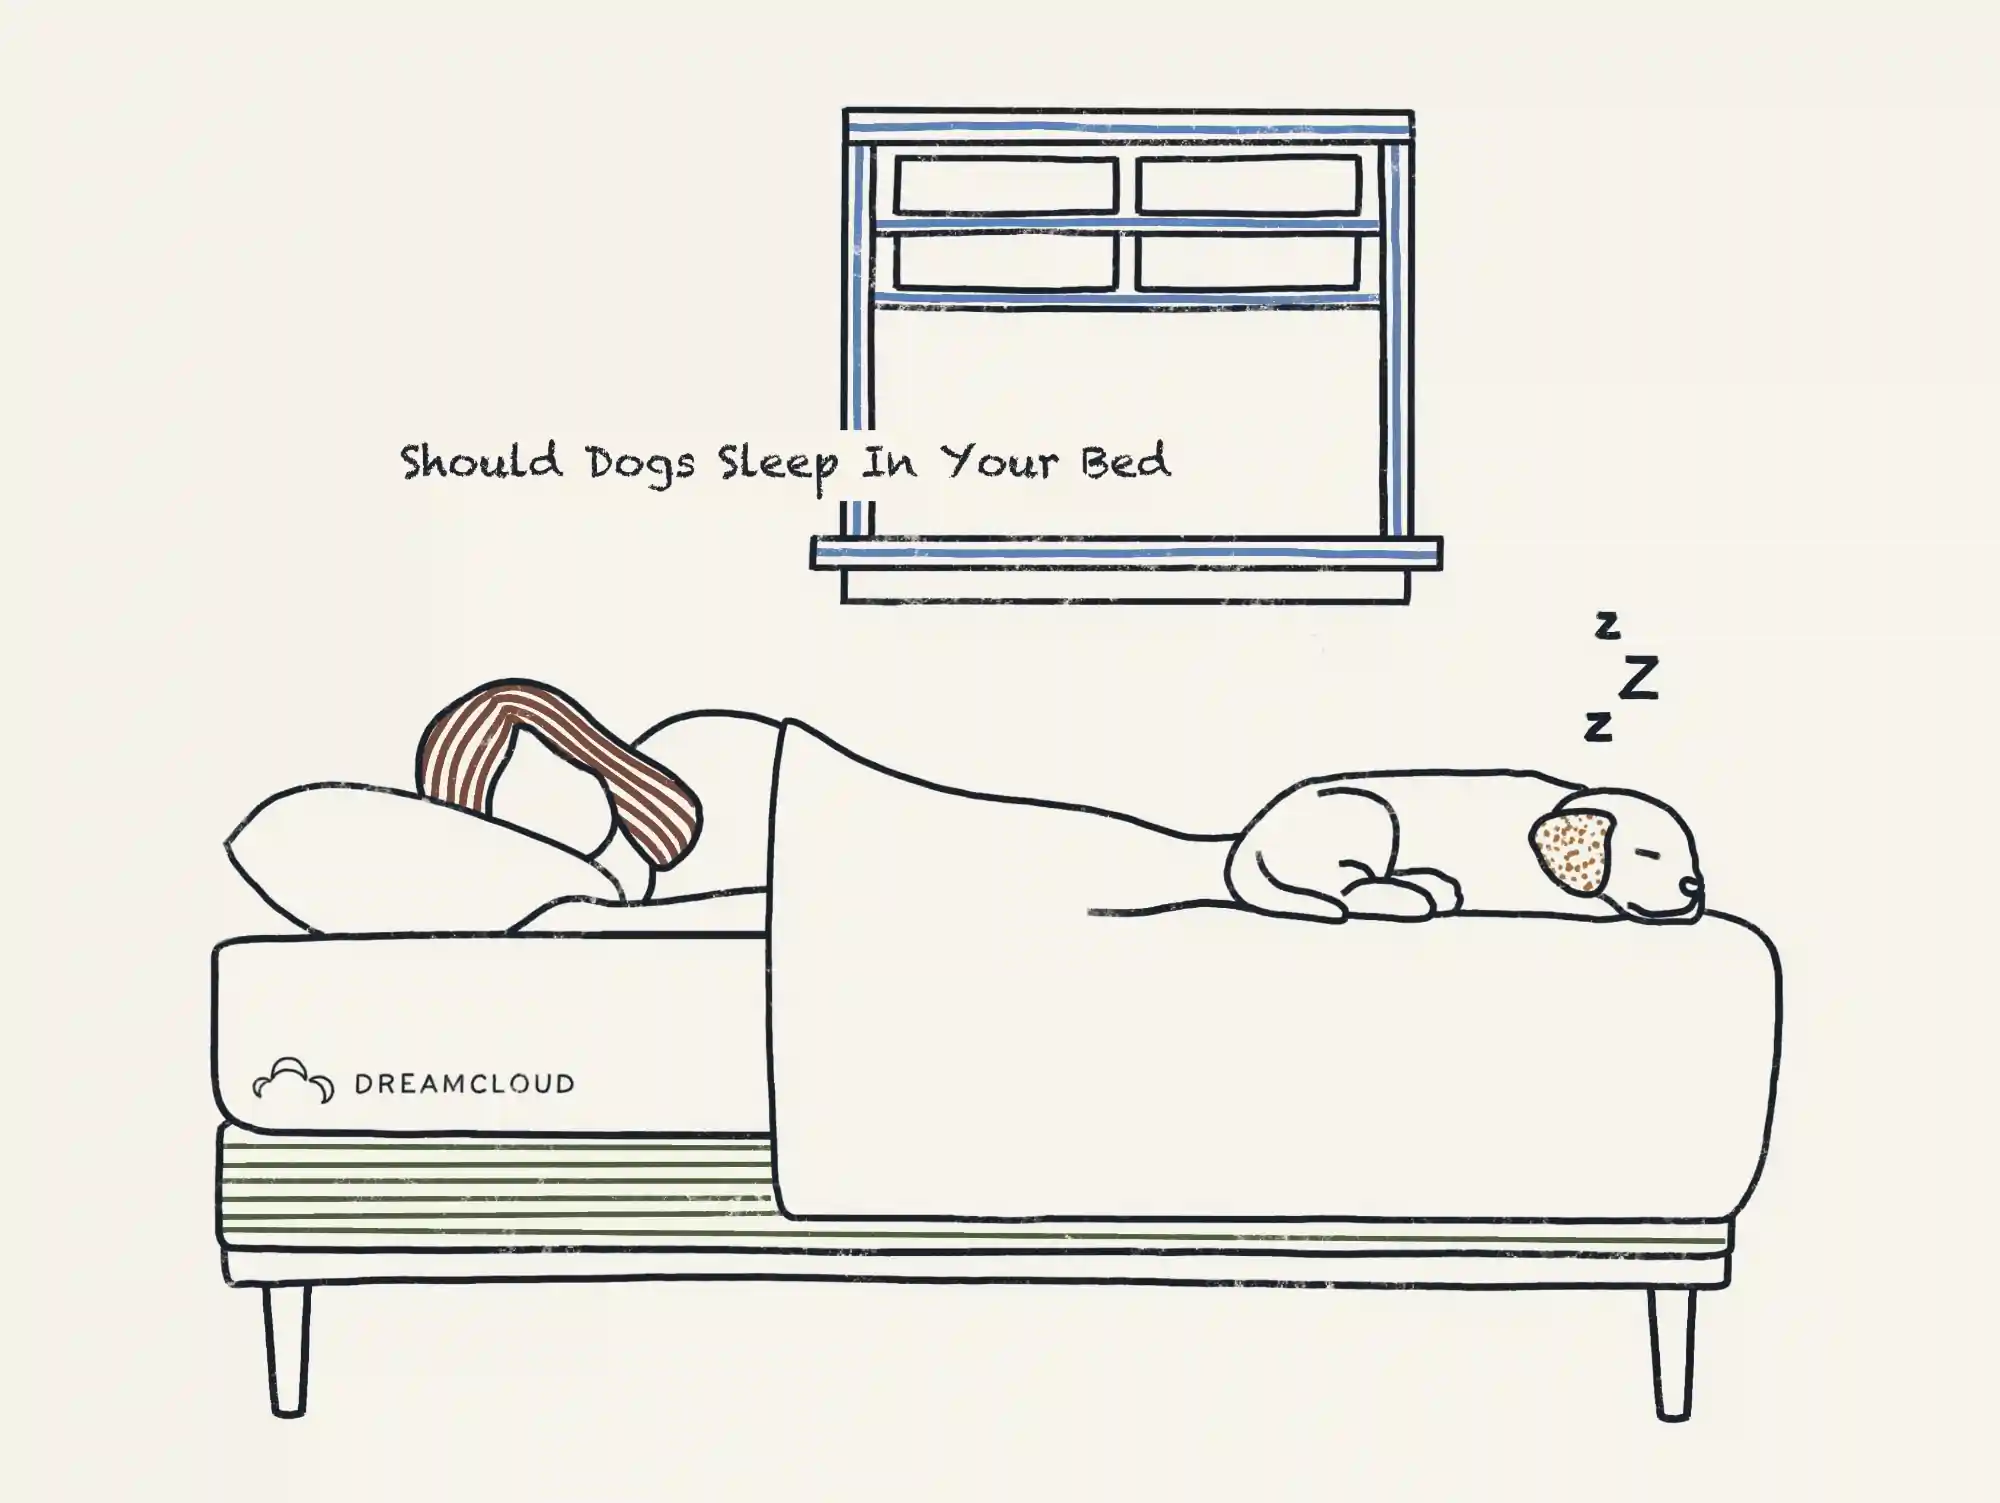 illustration of should dogs sleep in your bed